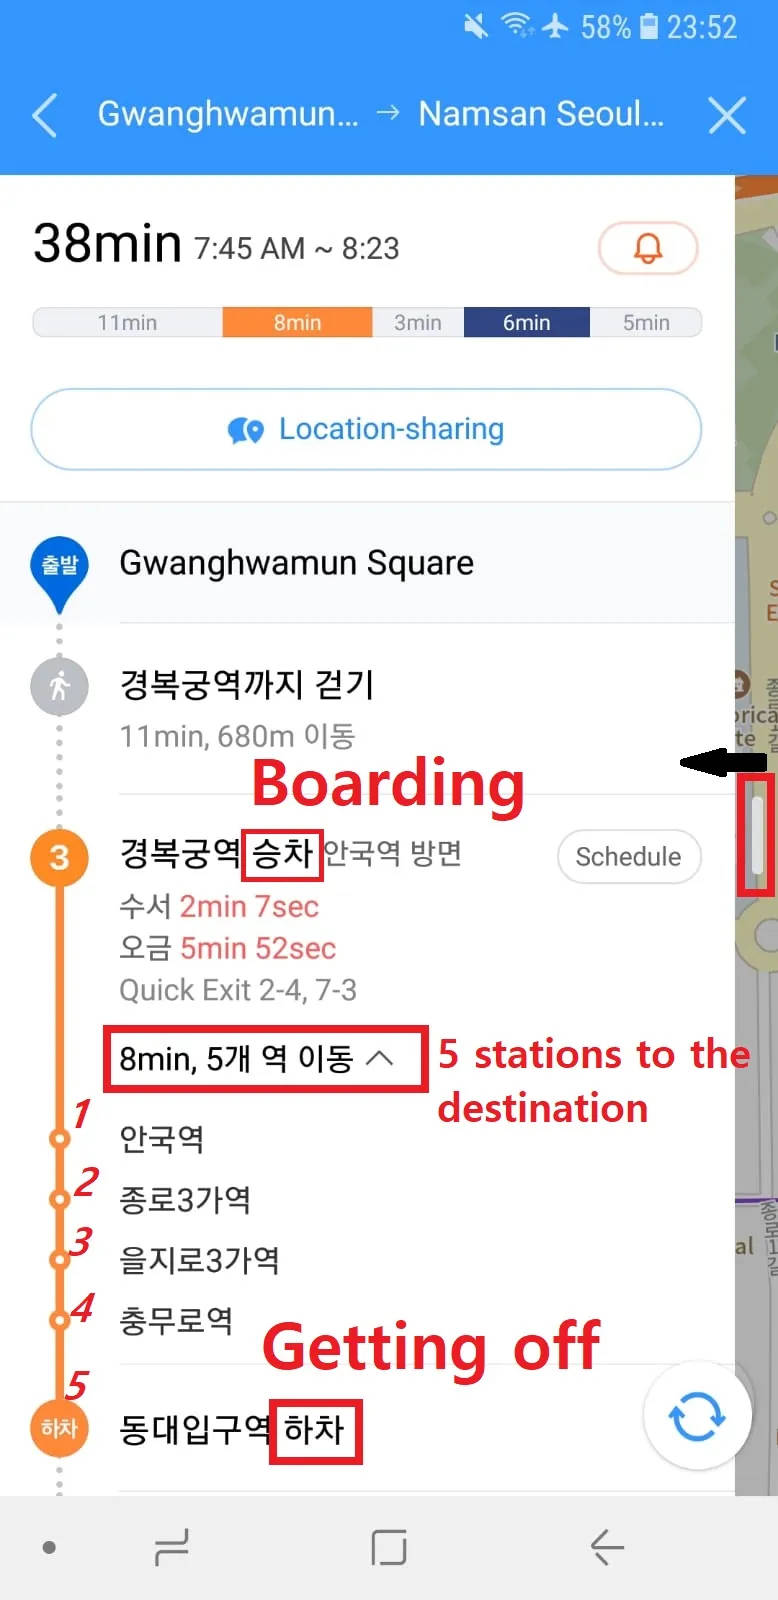 The explanations for the Korean words used in finding a route